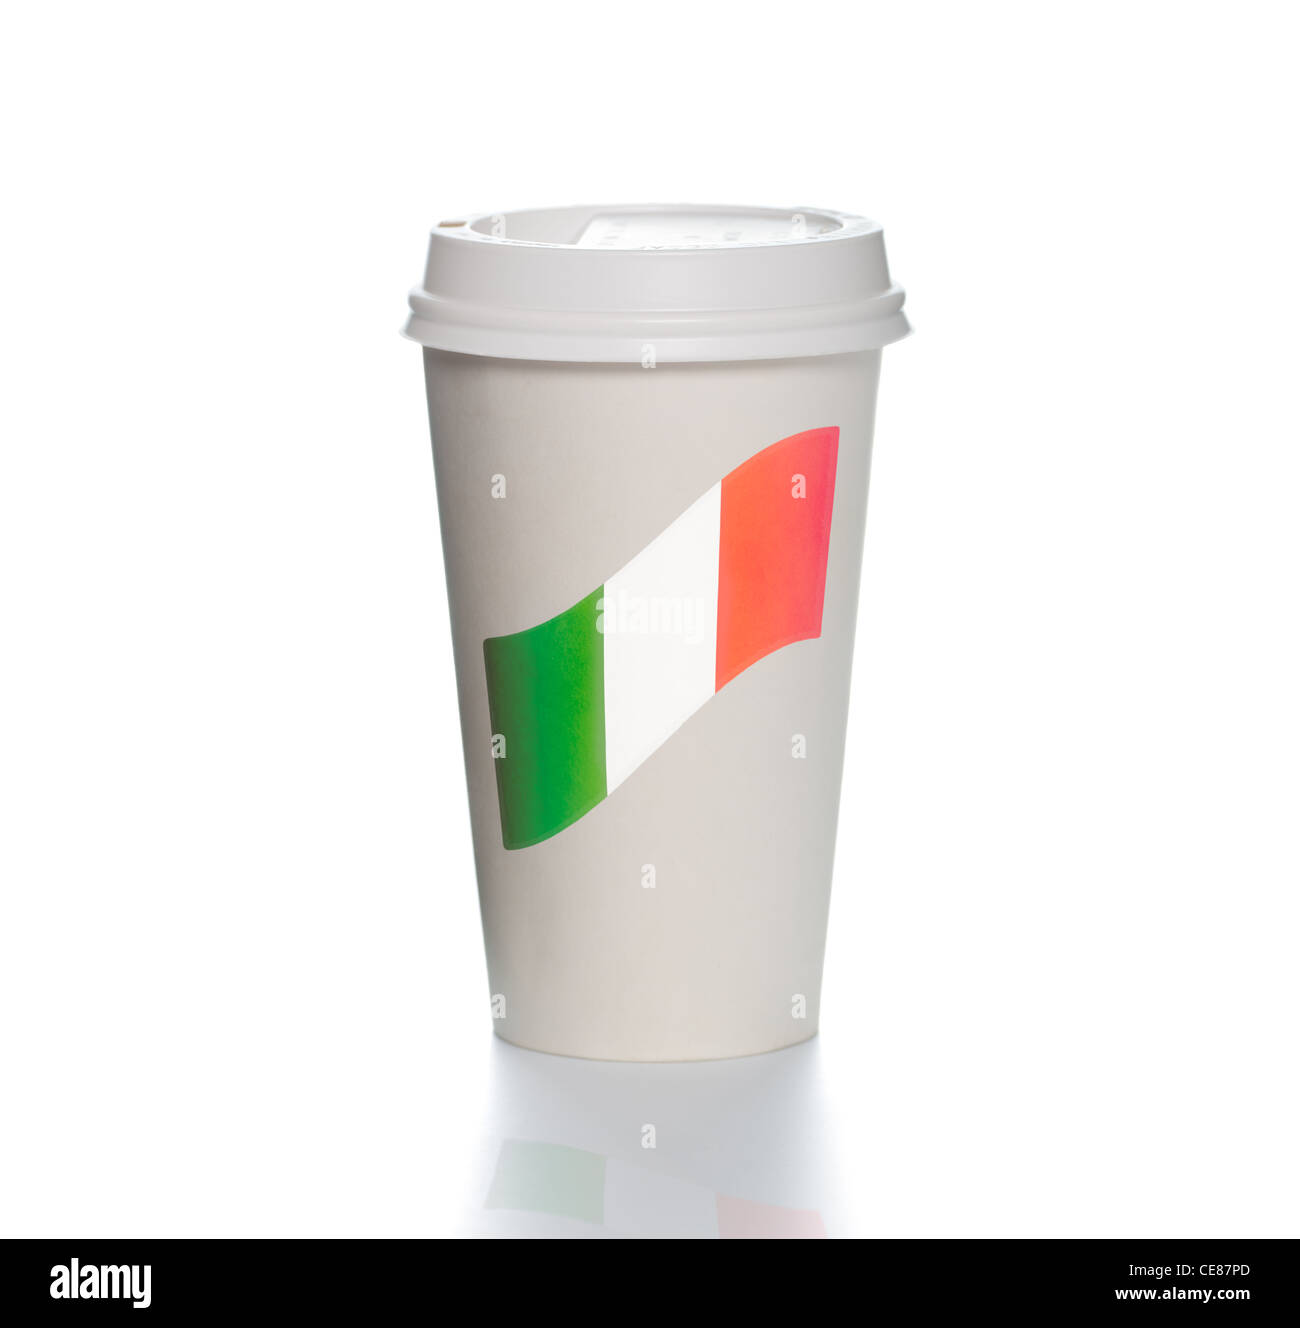 White paper coffee cup with plastic cap on top and reflection underneath. Flag of Italy on cup. Square format. Stock Photo